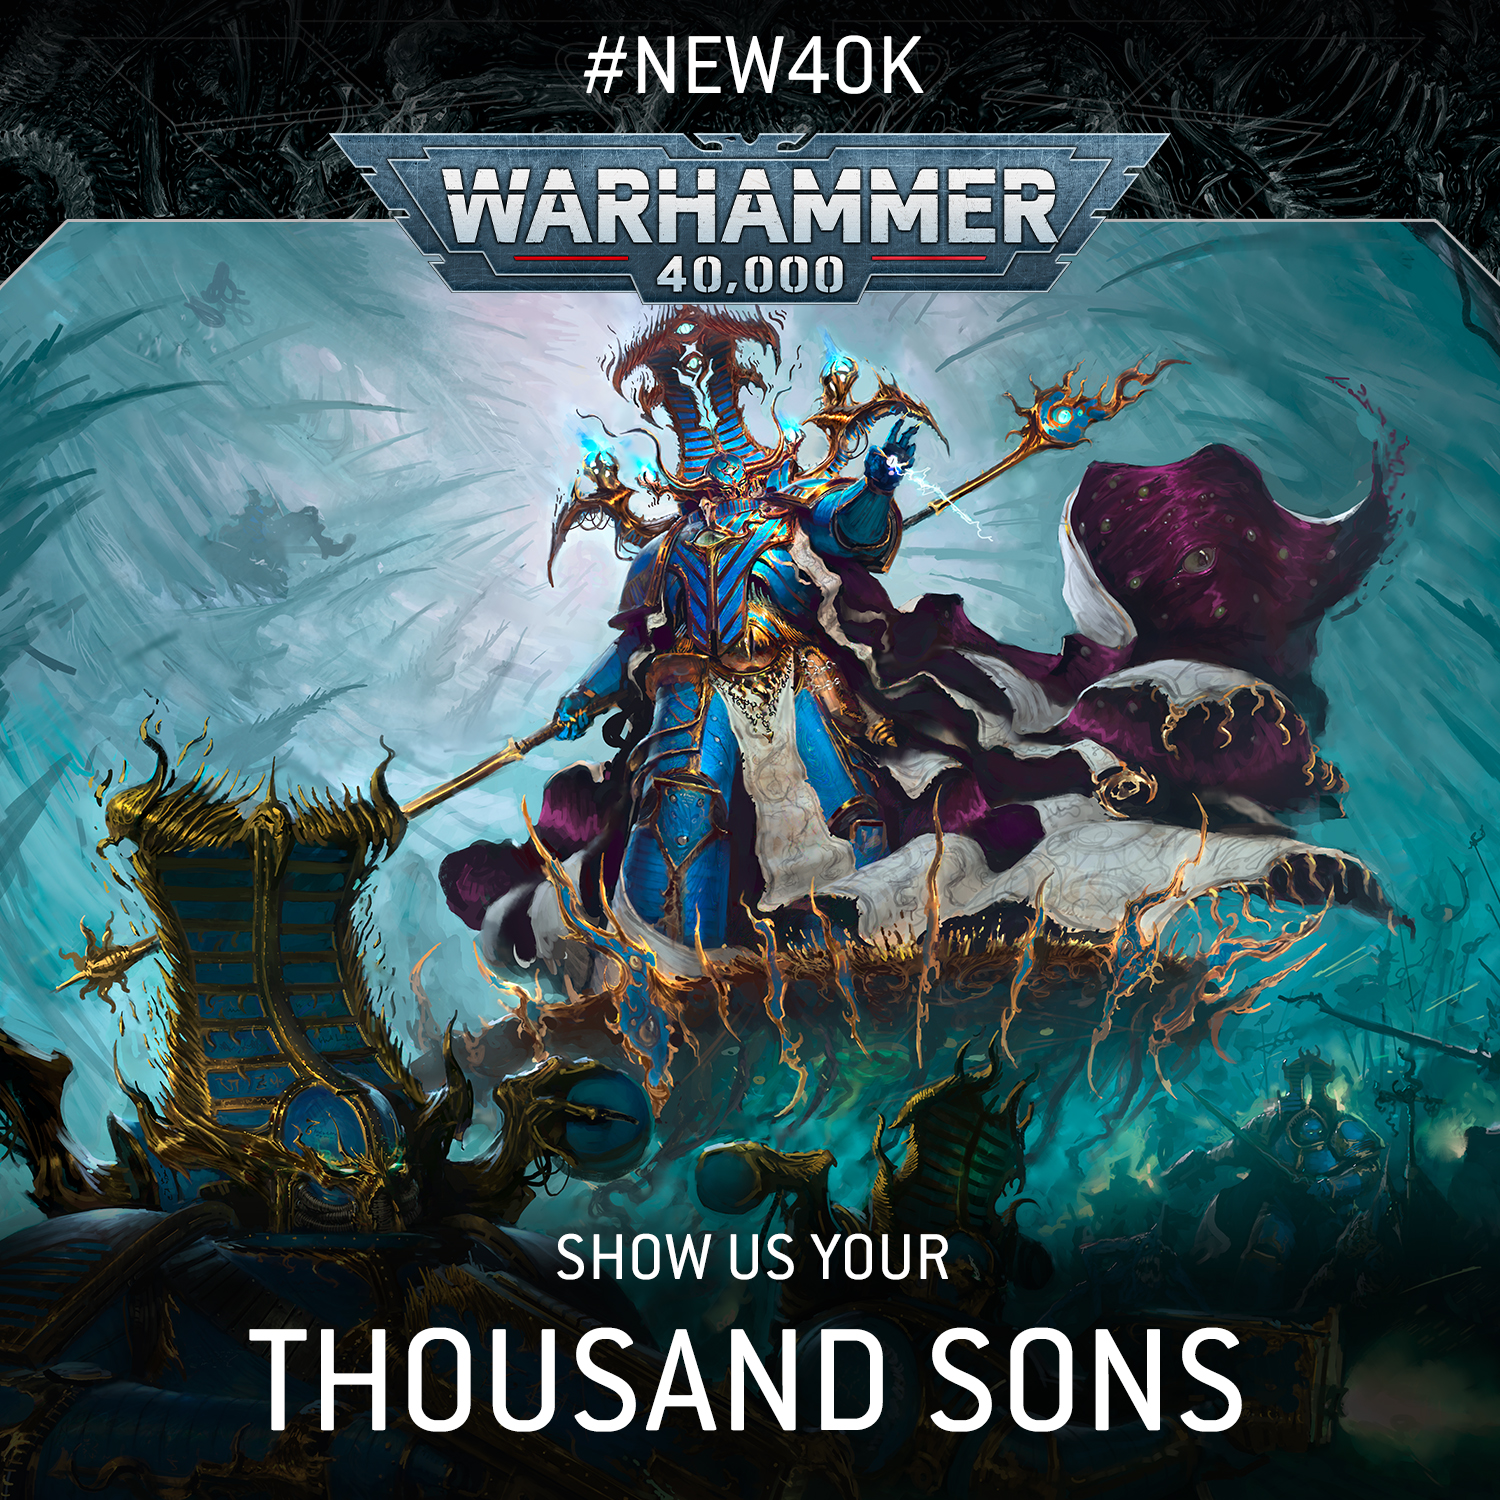 Thousand Sons Poster